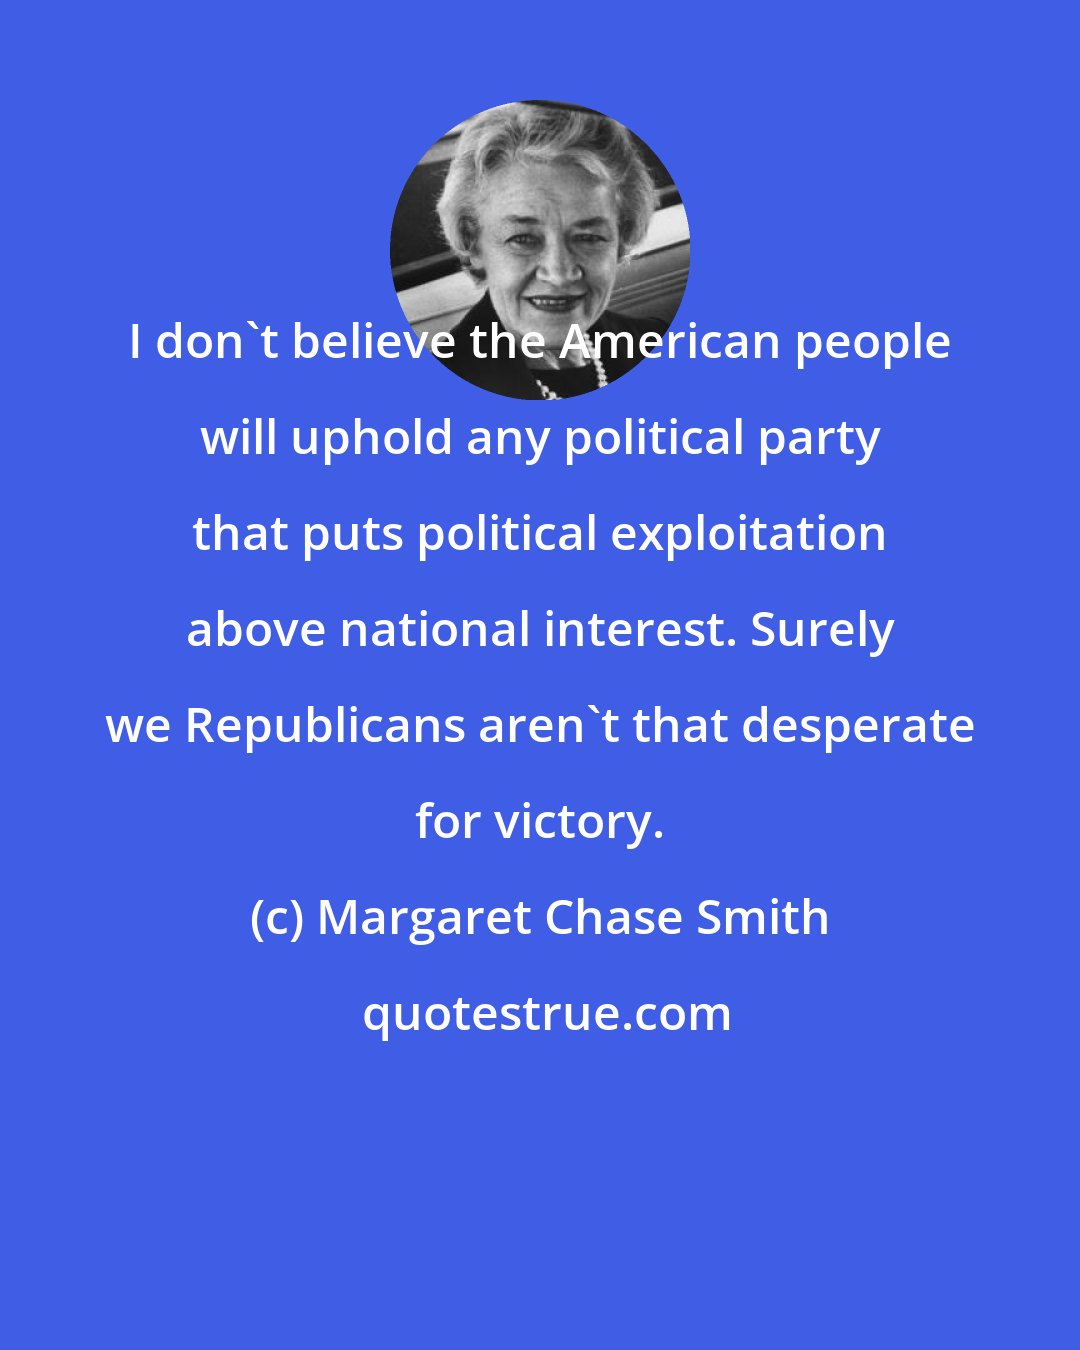 Margaret Chase Smith: I don't believe the American people will uphold any political party that puts political exploitation above national interest. Surely we Republicans aren't that desperate for victory.